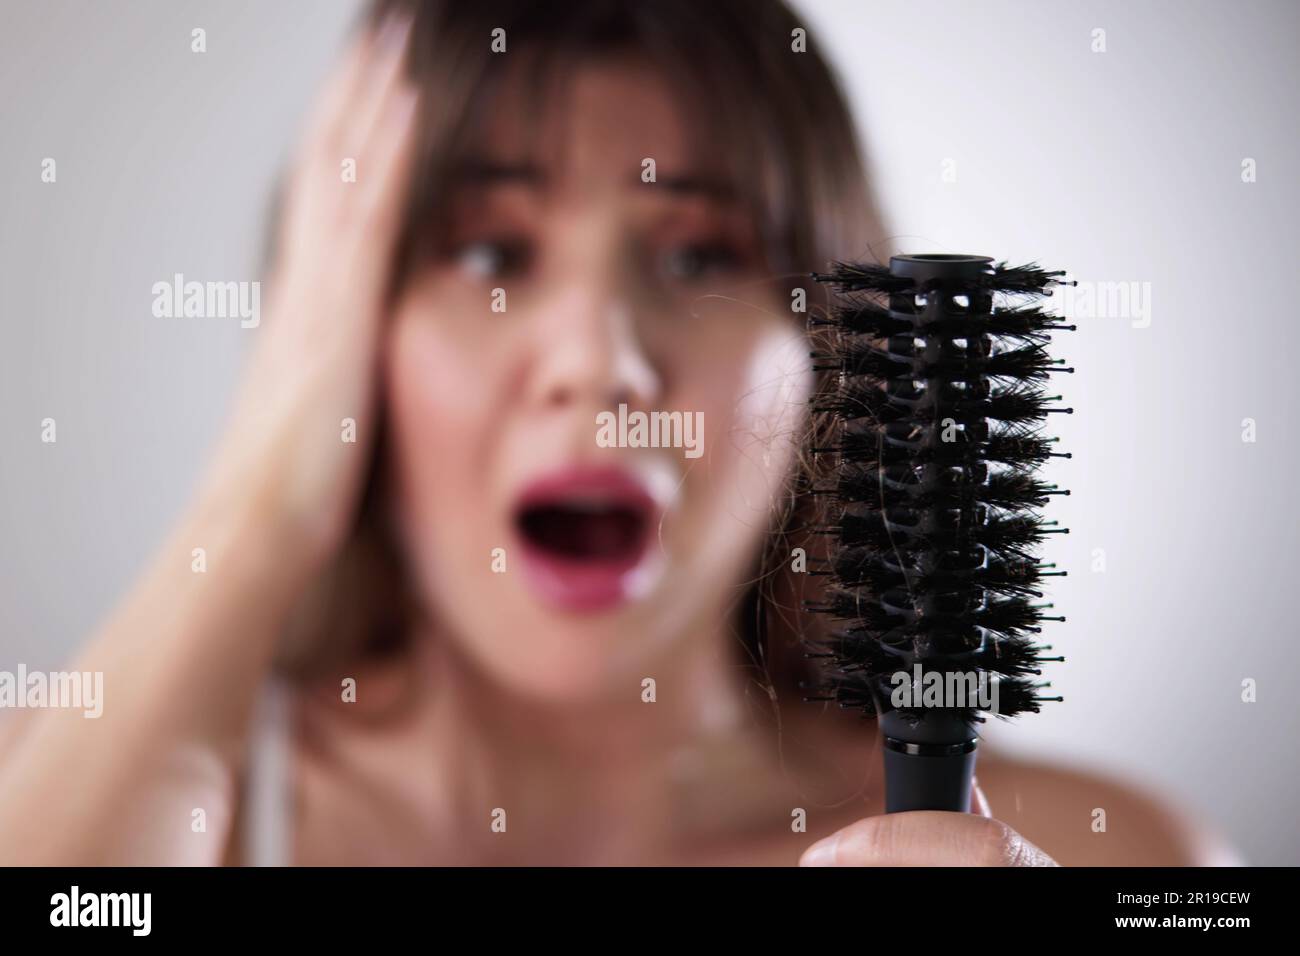 Young Woman In Bathrobe Holding Comb Looking At Hair Loss At Home Stock Photo